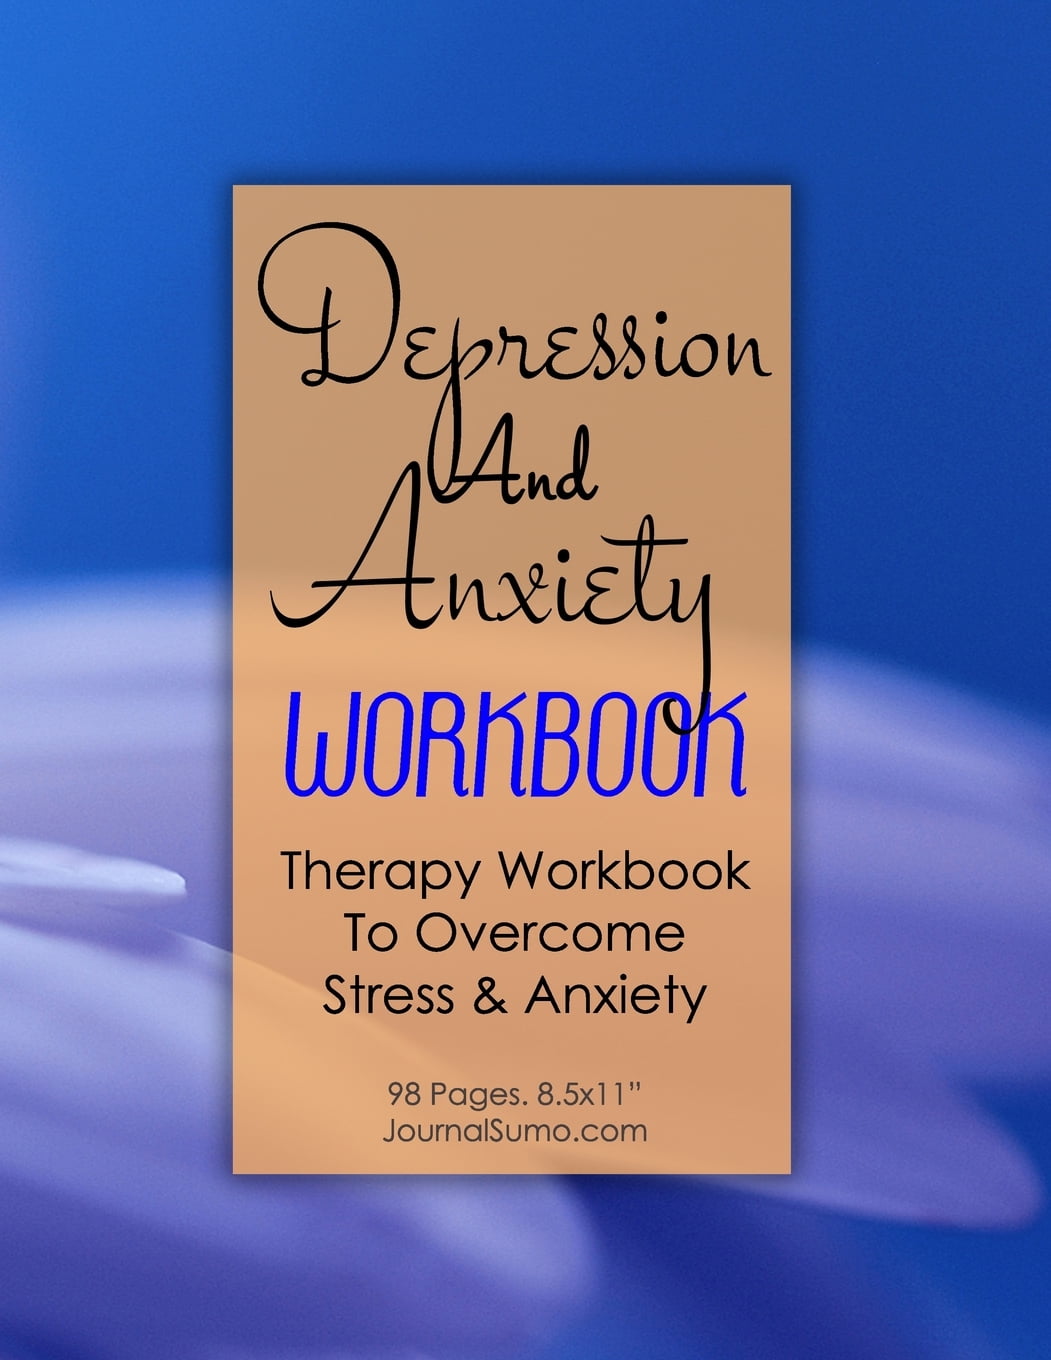 Depression And Anxiety Workbook - Therapy Workbook To Overcome Stress